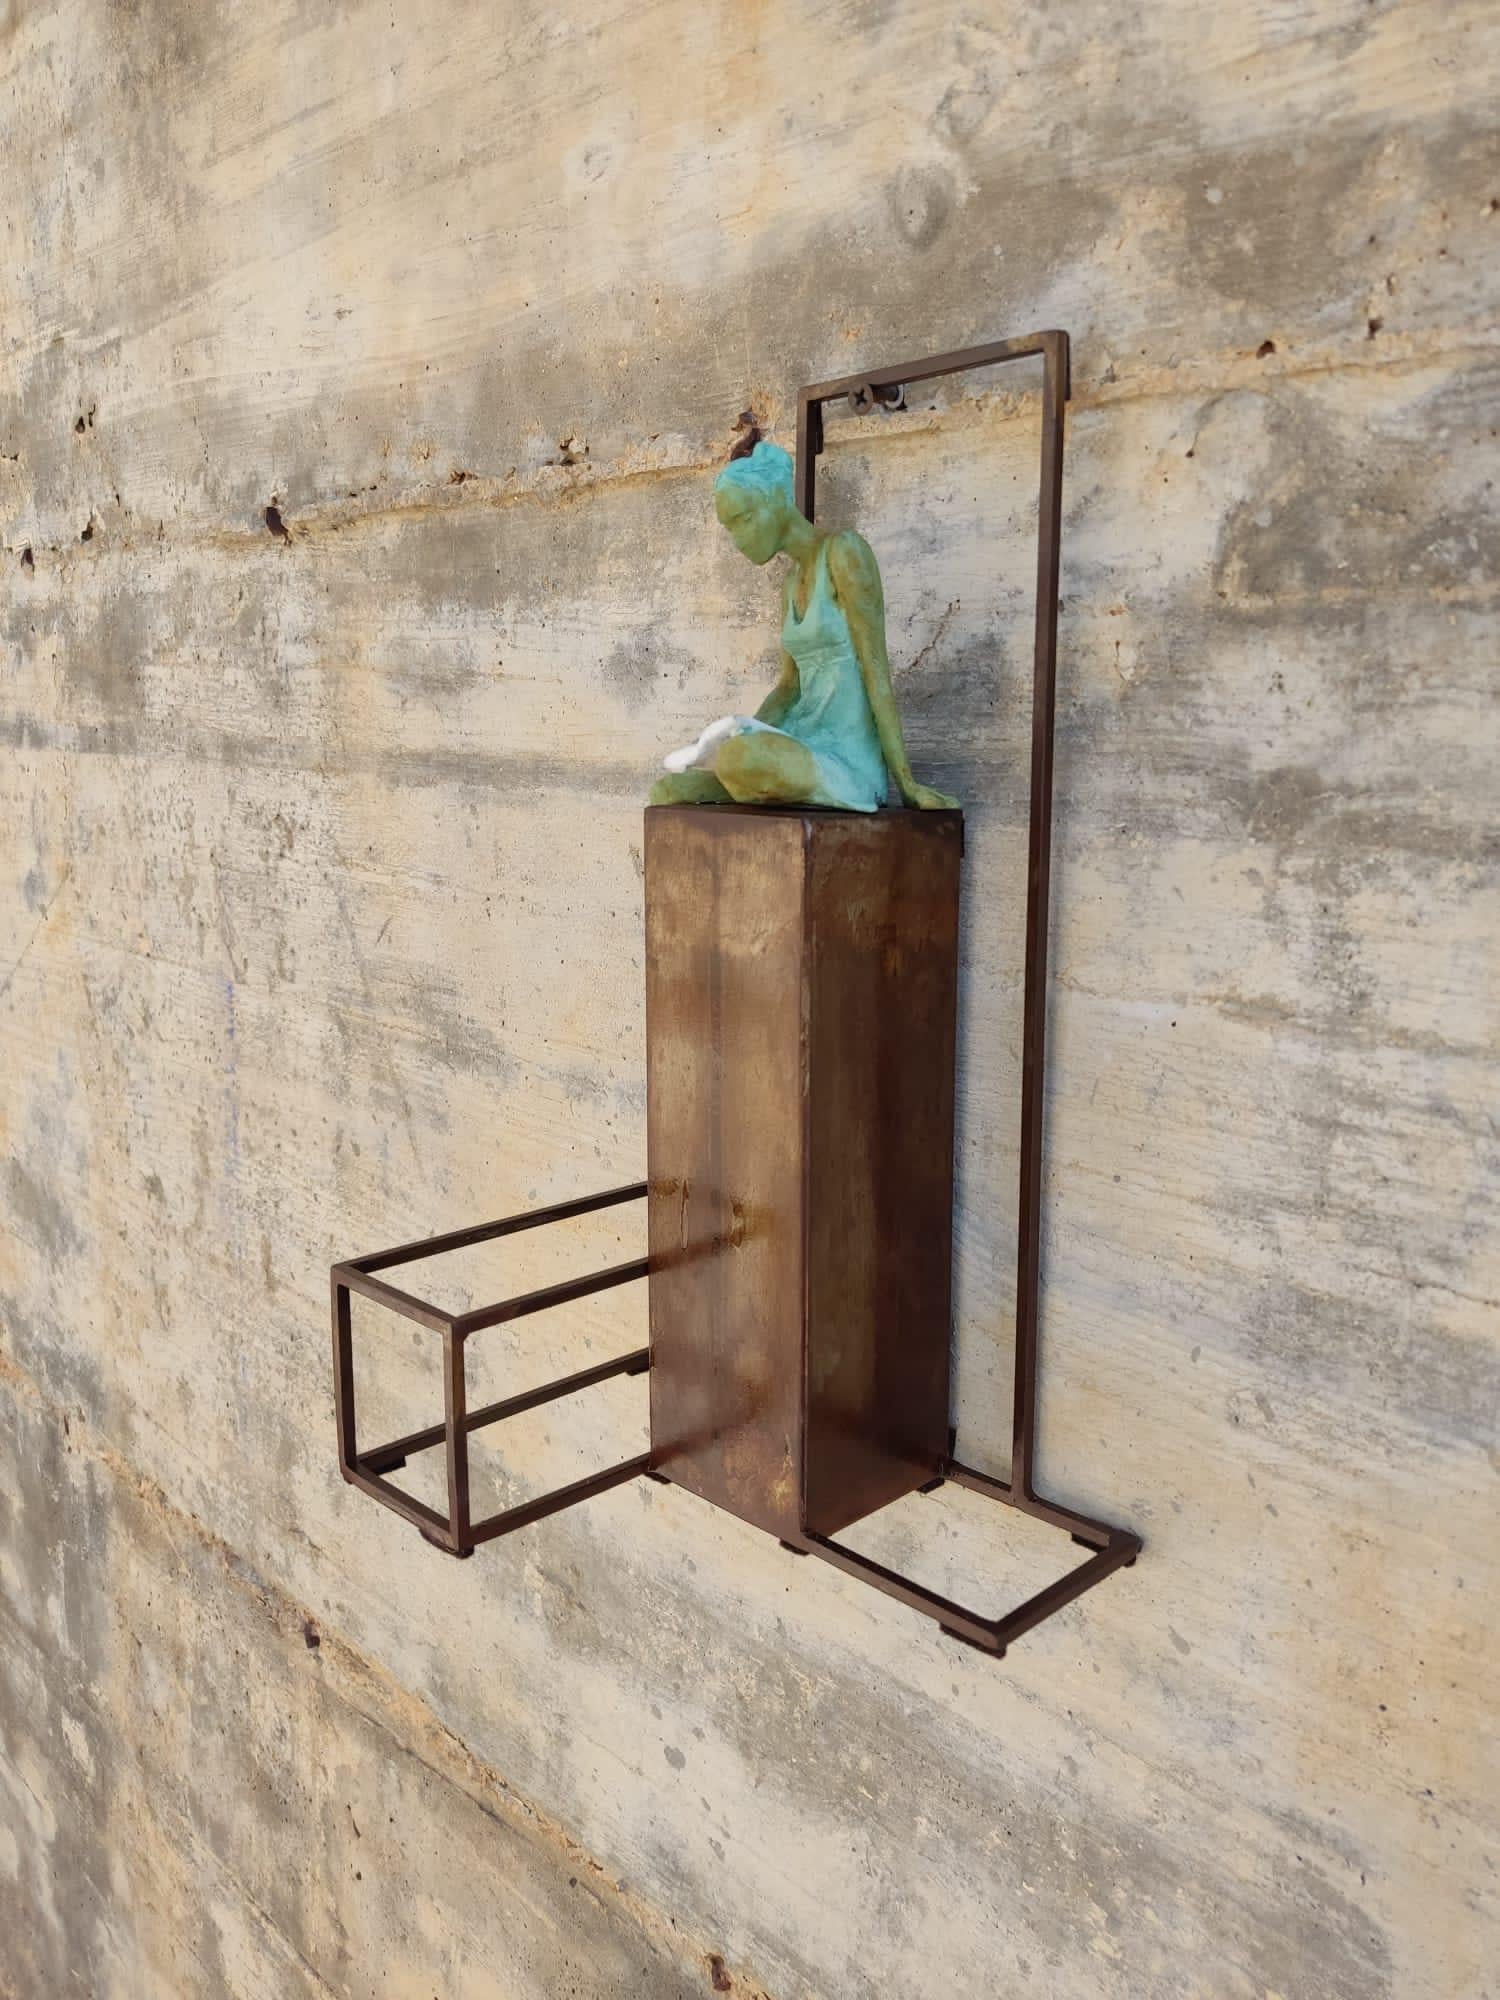 Sense and Sensibility is a bronze sculpture with green patina, it is connected to a steel base. The edition size is 50. This sculpture stands on shelf as well as be hung on wall. 

Joan’s latest sculpture series of female figures brings an